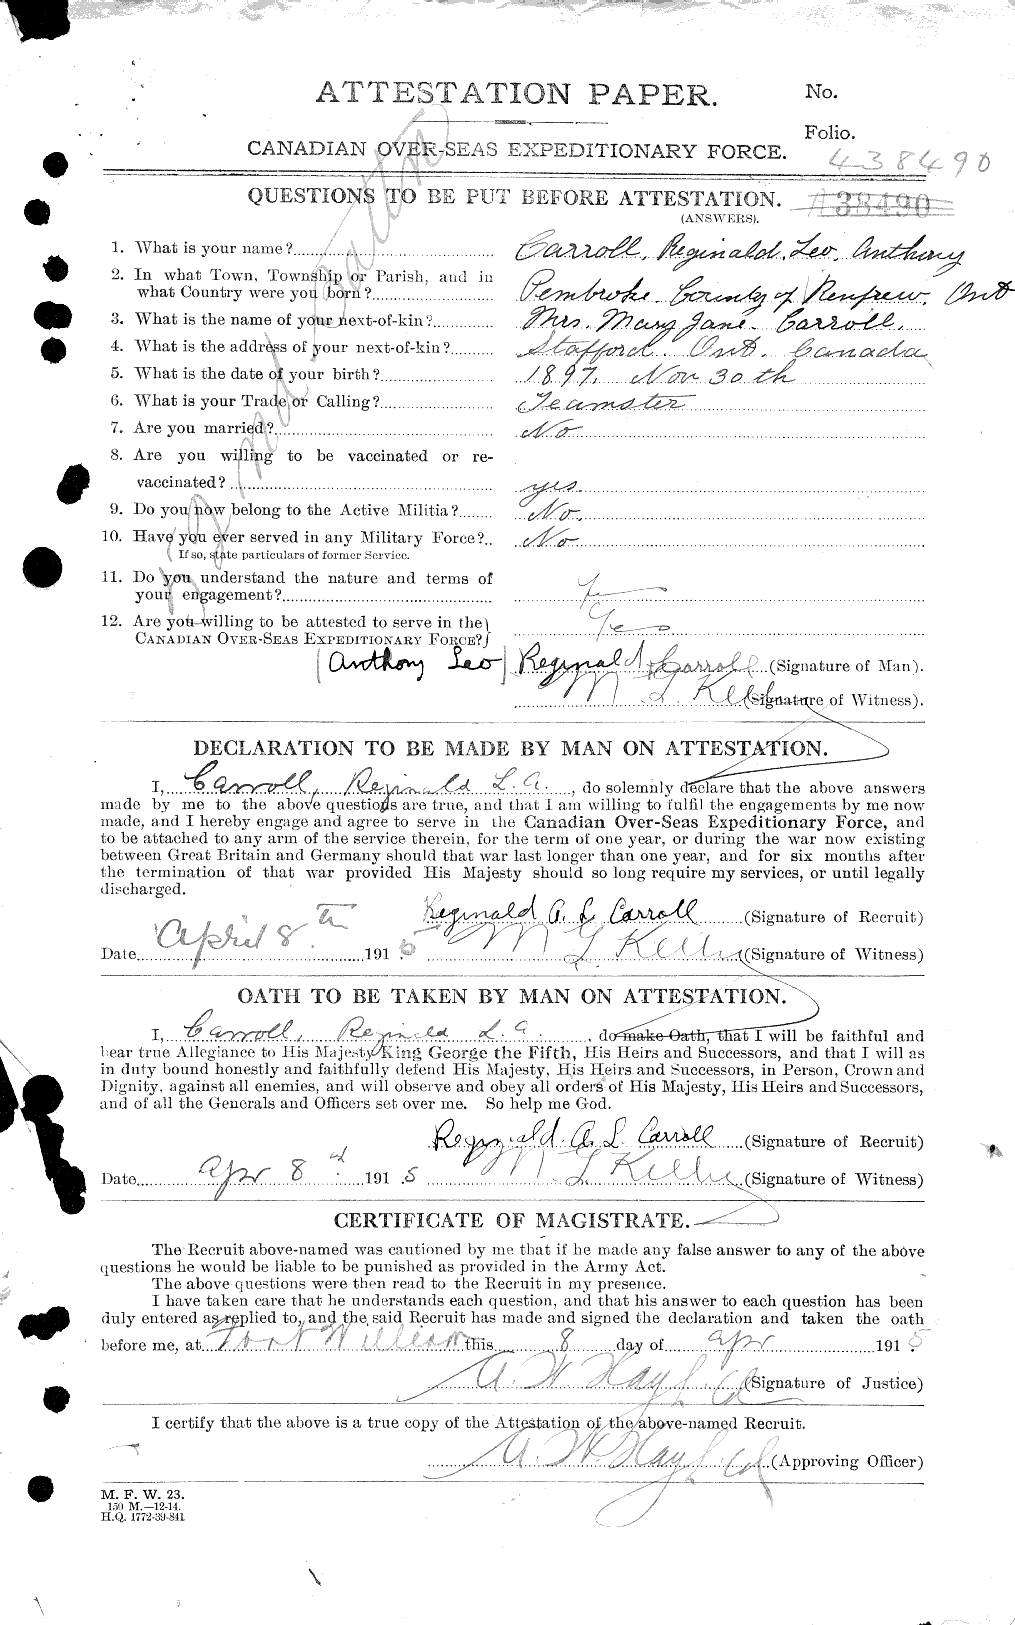 Personnel Records of the First World War - CEF 005697a